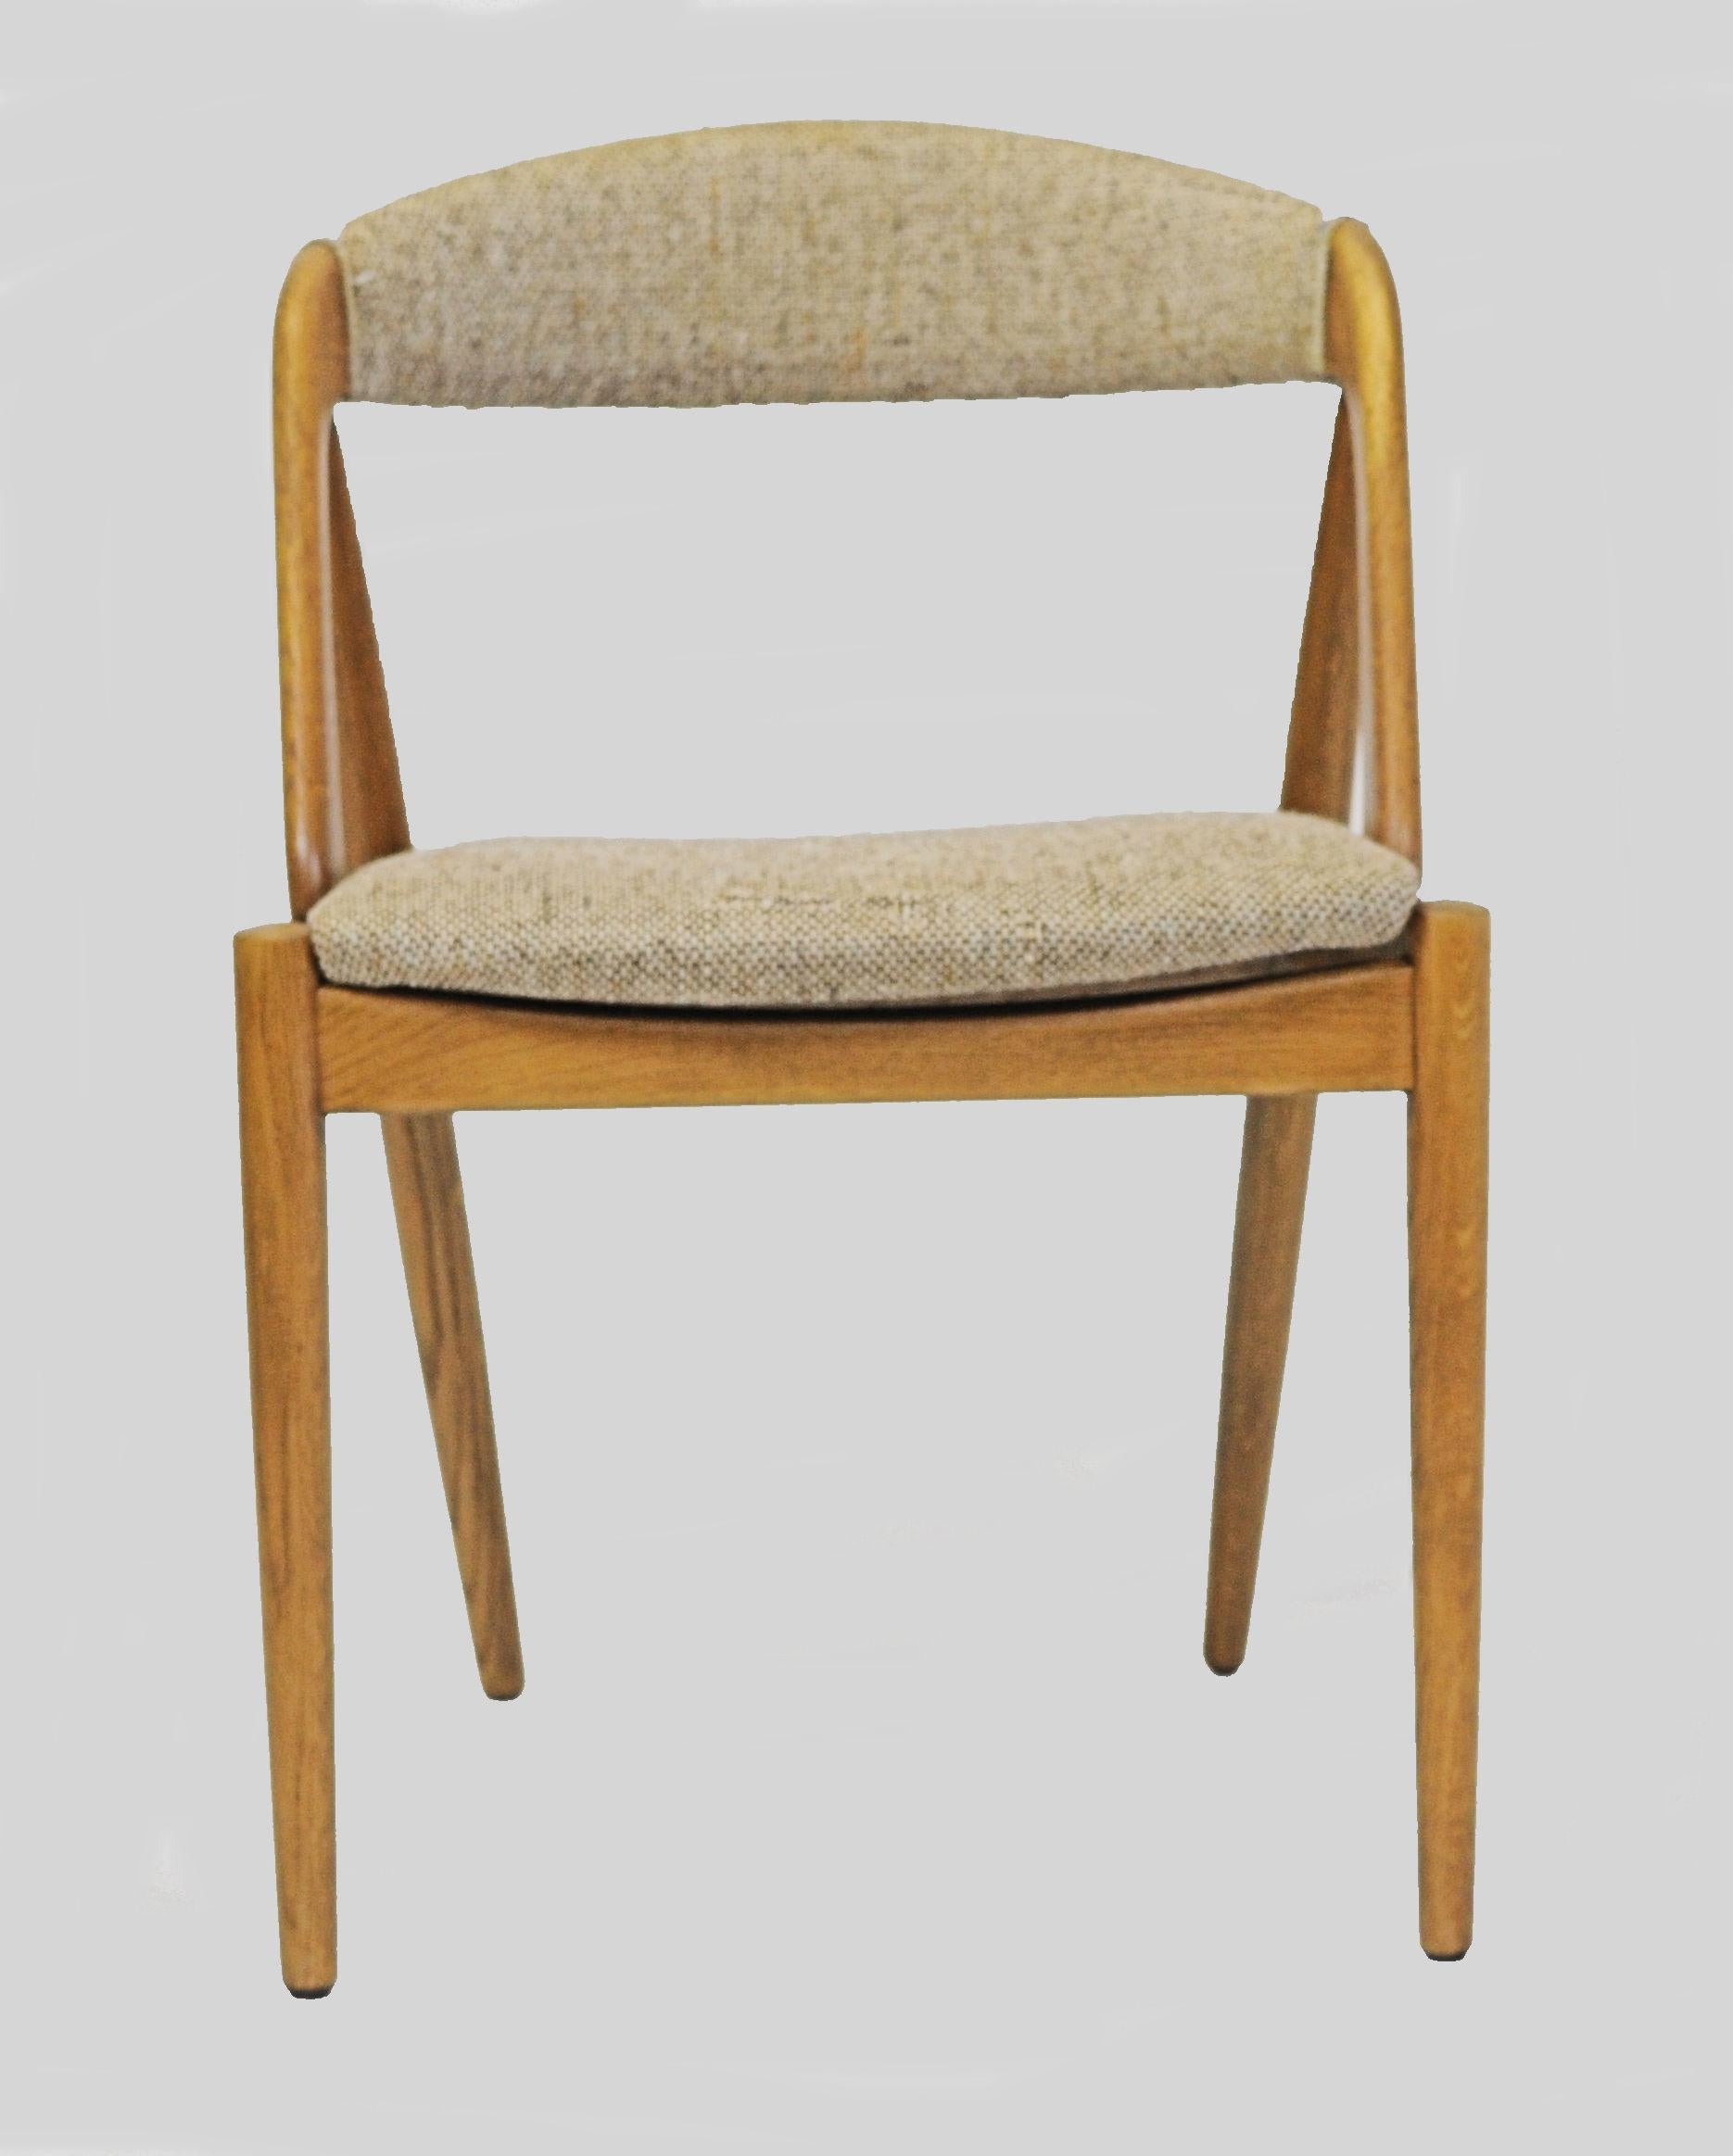 Set of eight model 31 dining chairs in oak designed by Kai Kristiansen for Schou Andersens Møbelfabrik in 1956.

This model called the A frame model is one of the most well-known chairs designed by Kai Kristiansen, a true Classic with its at first